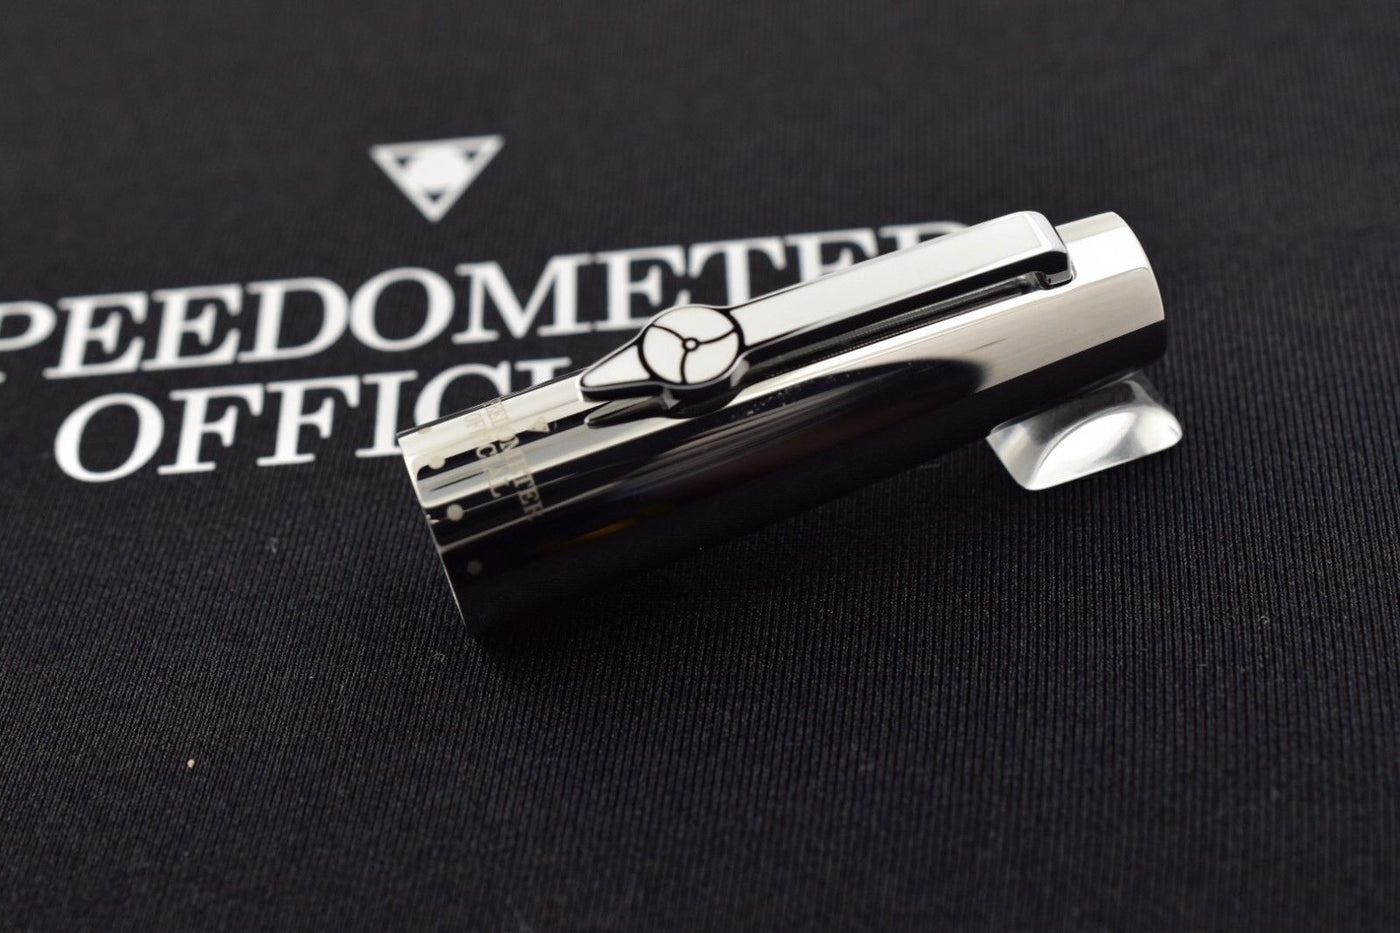 Speedometer Official Silver Steel with Black & Green Spare Ring Rollerball Pen-Speedometer Official-Truphae